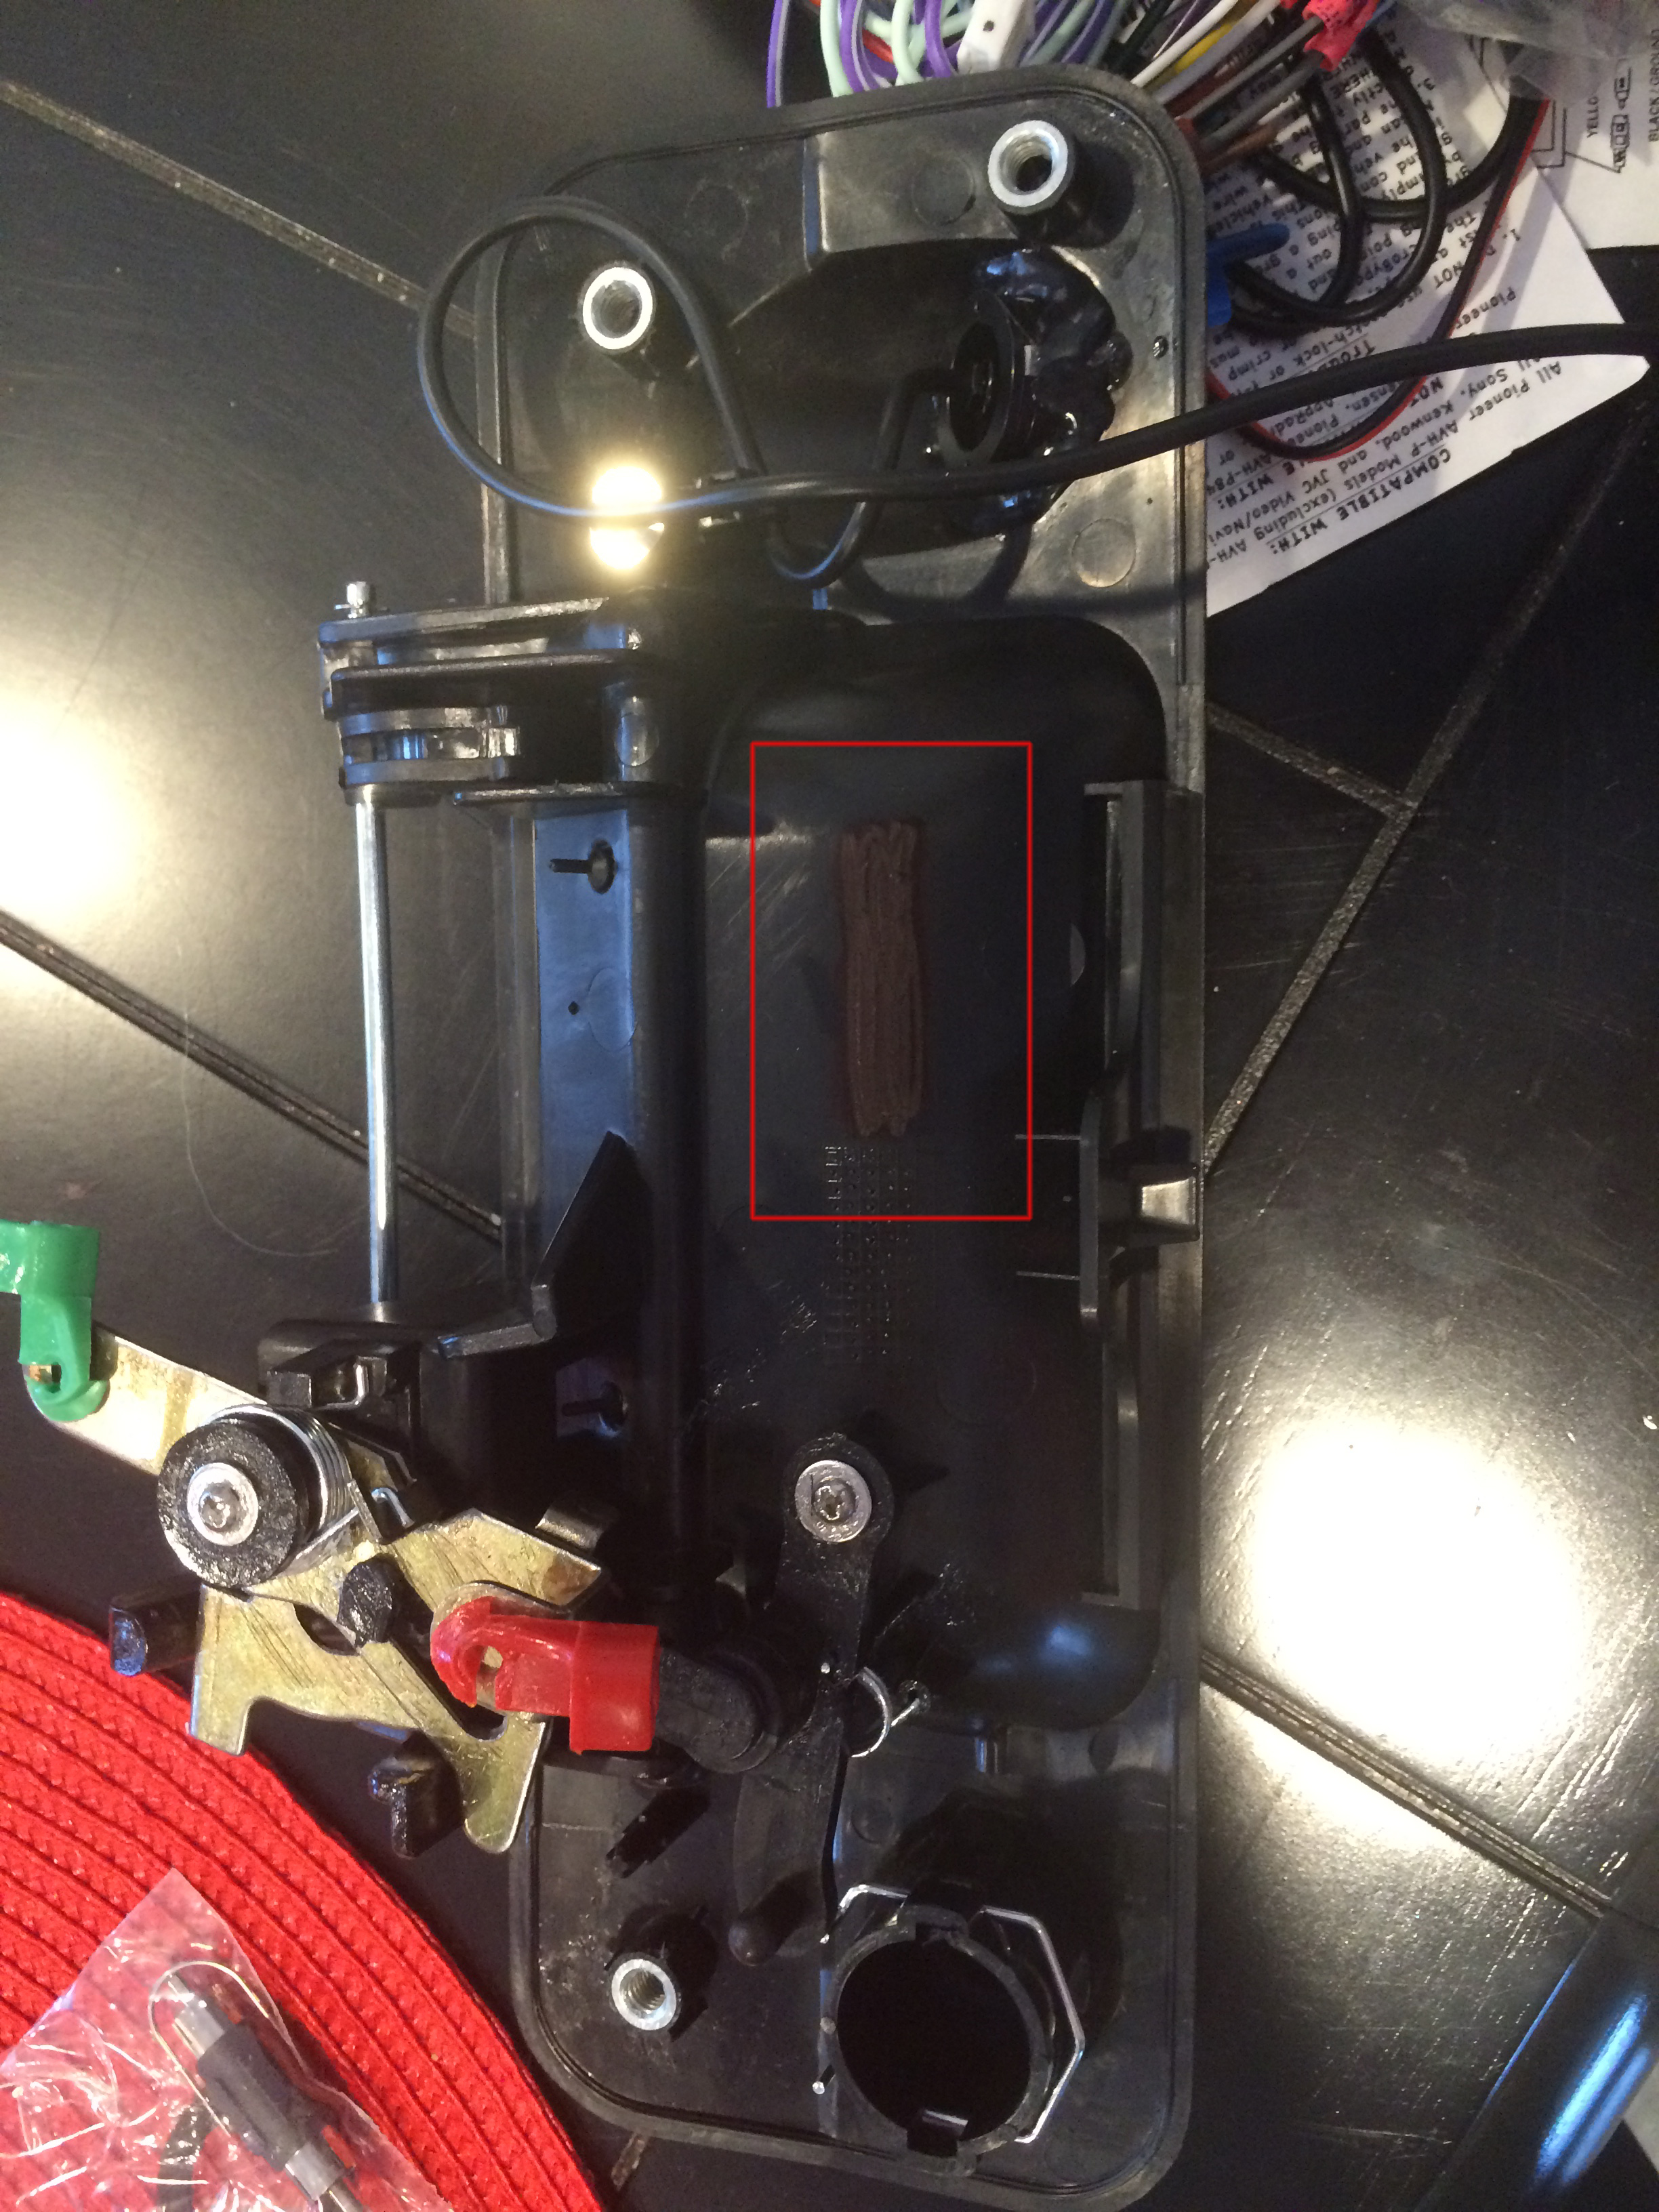 Square shows defacing of the part number and notice the hand glued camera